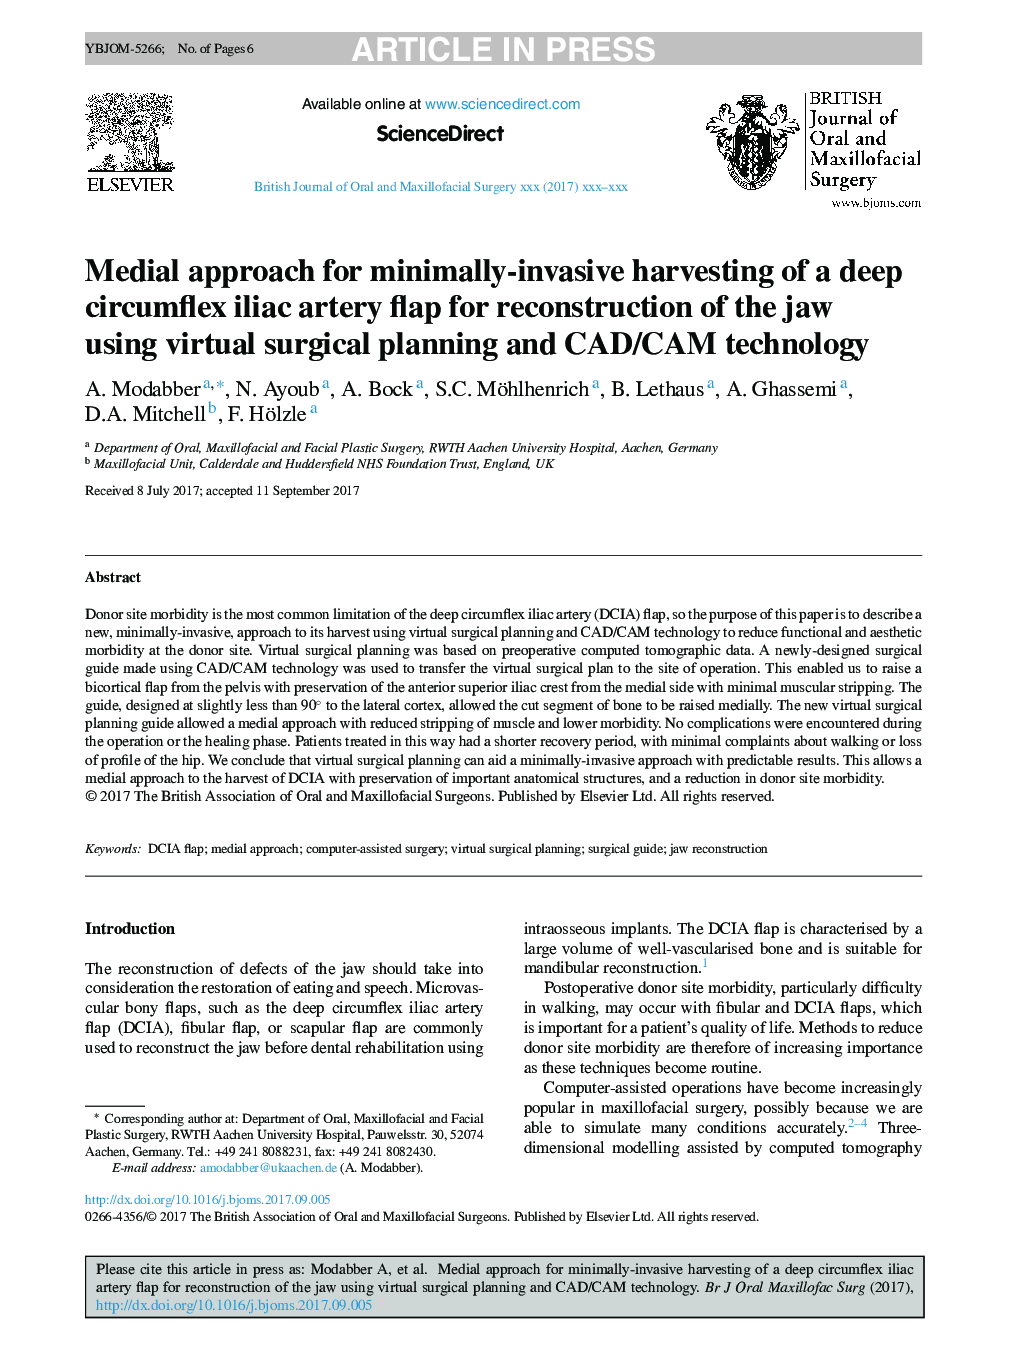 Medial approach for minimally-invasive harvesting of a deep circumflex iliac artery flap for reconstruction of the jaw using virtual surgical planning and CAD/CAM technology